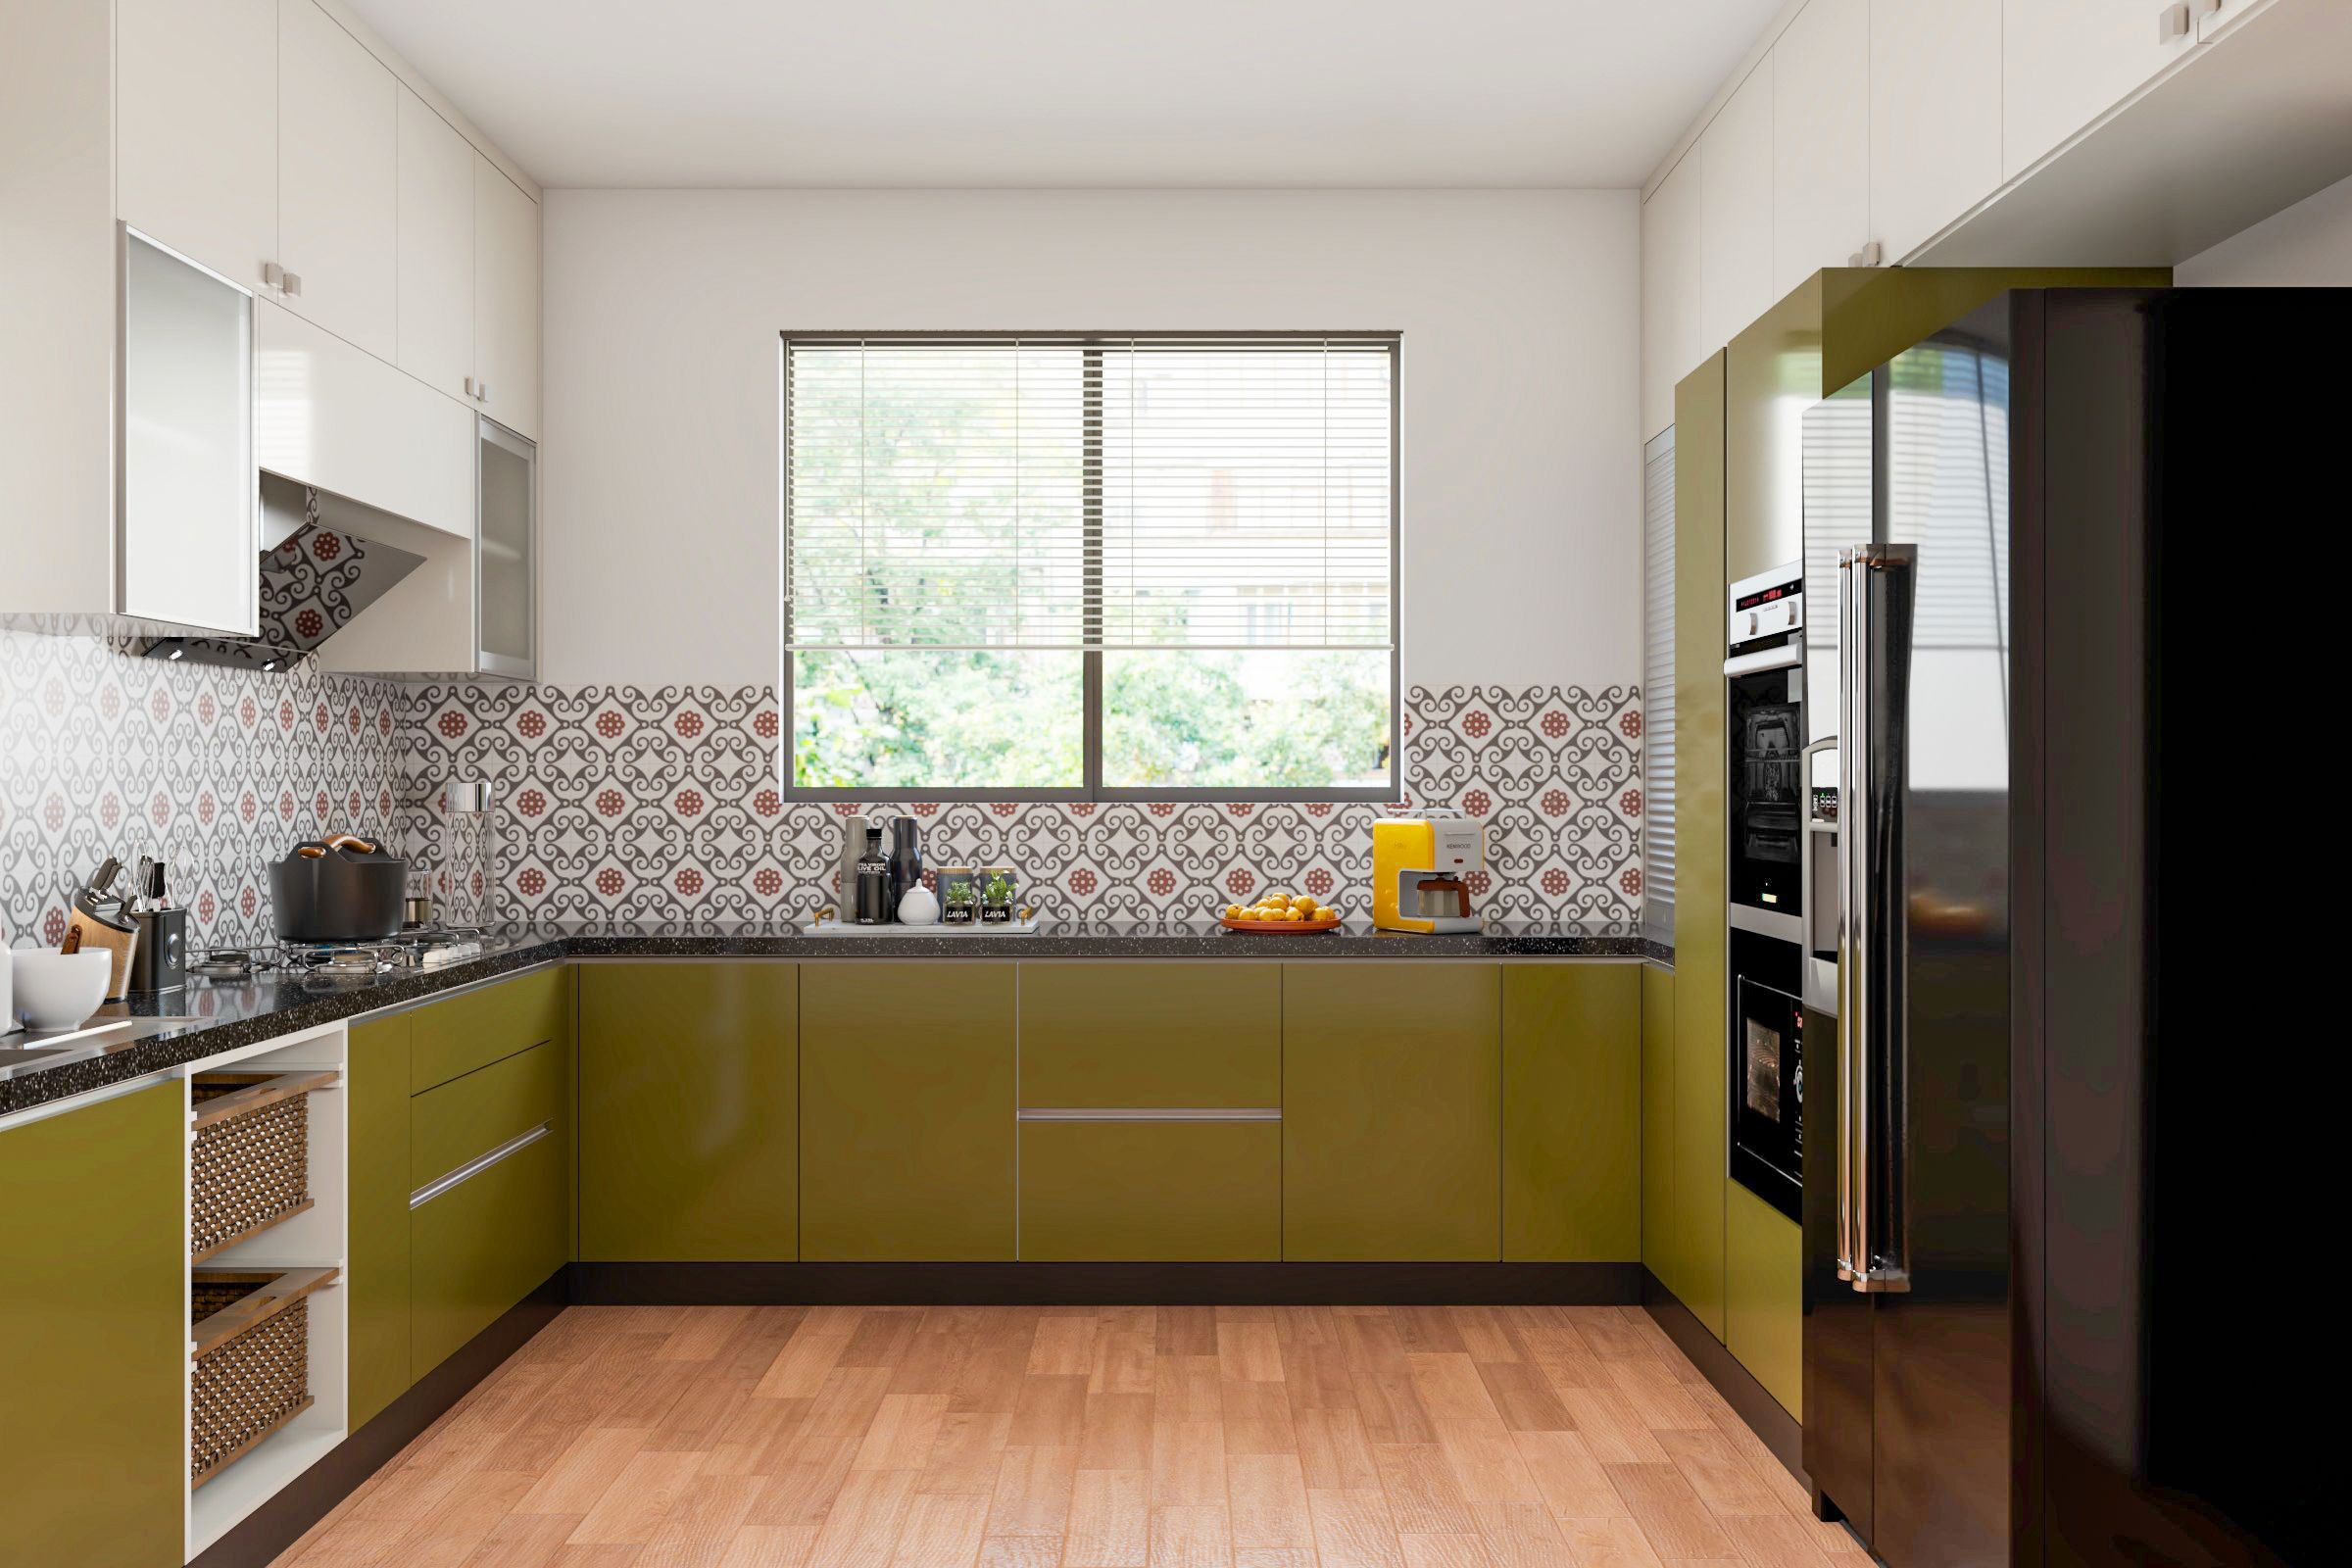 Spacious Lime Kitchen Design With Black Marble